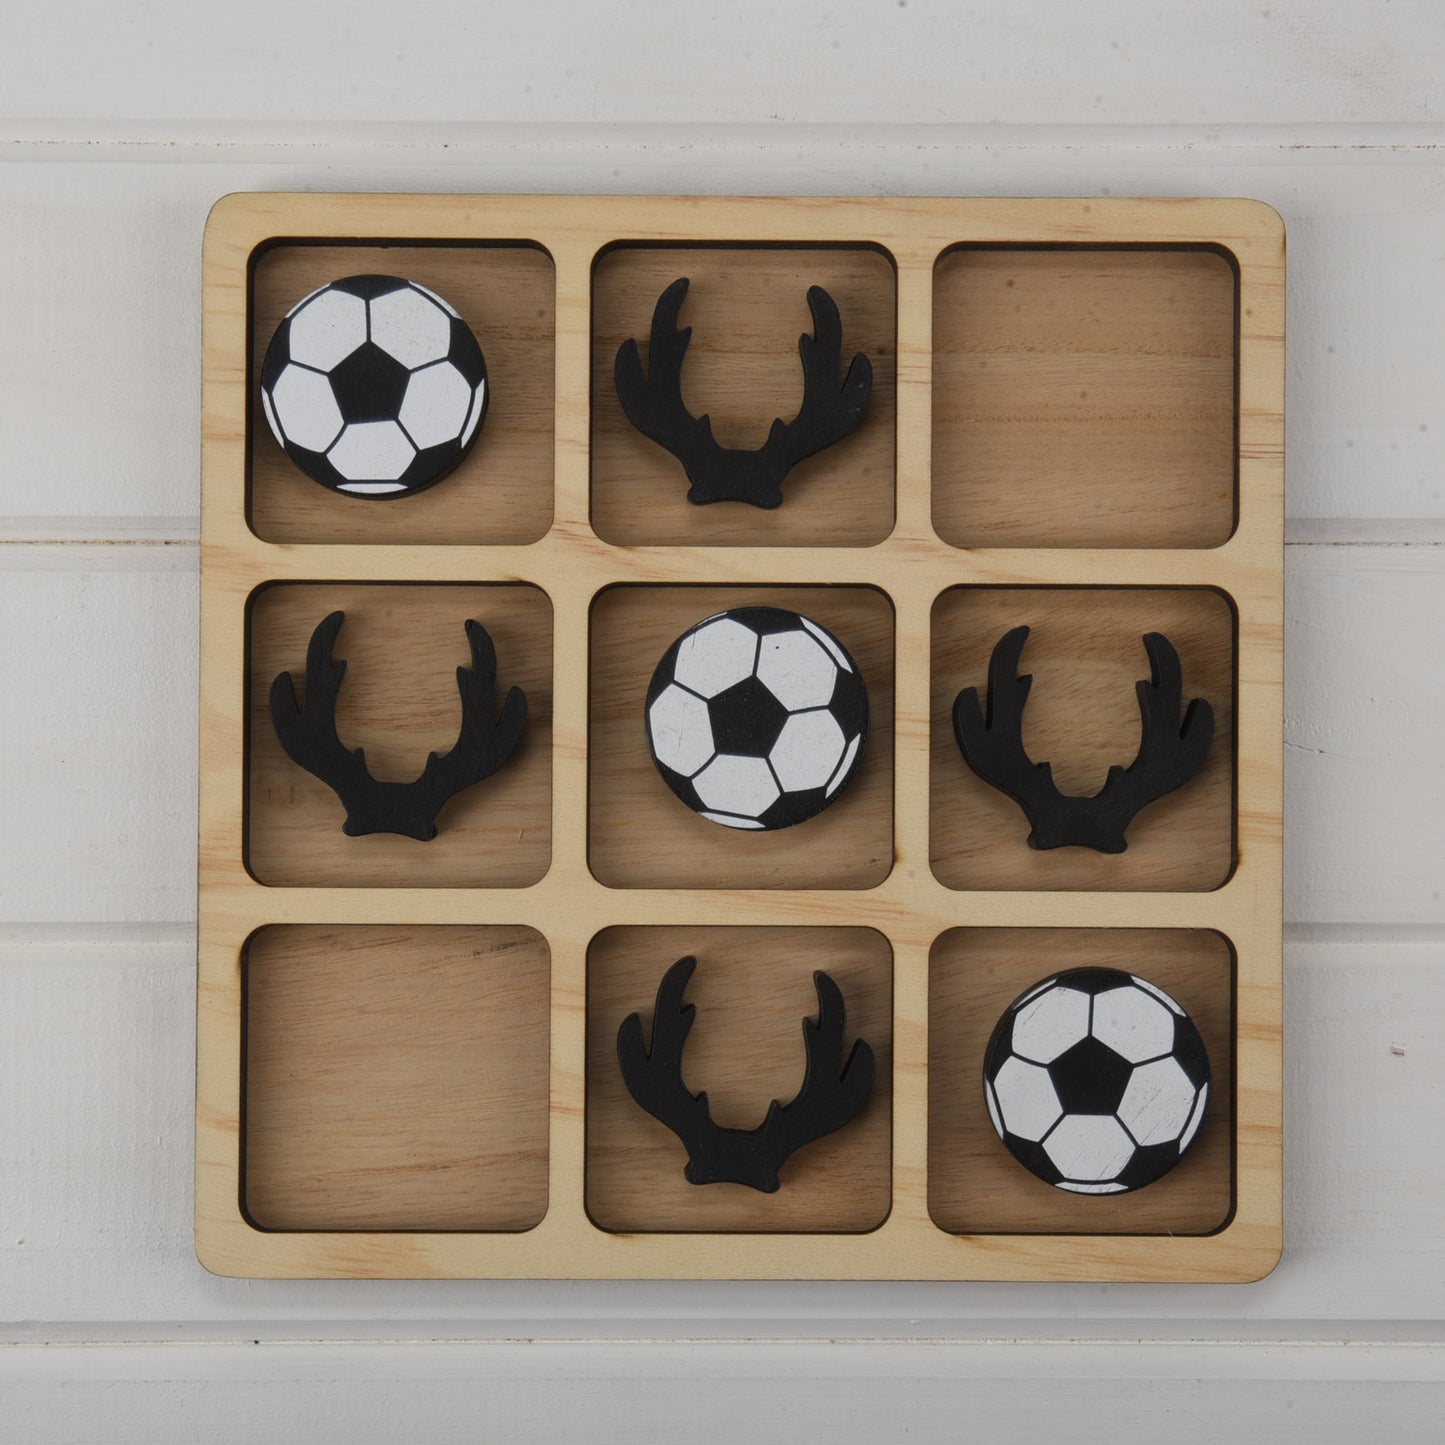 Soccer Tic Tac Toe - Non State Specific